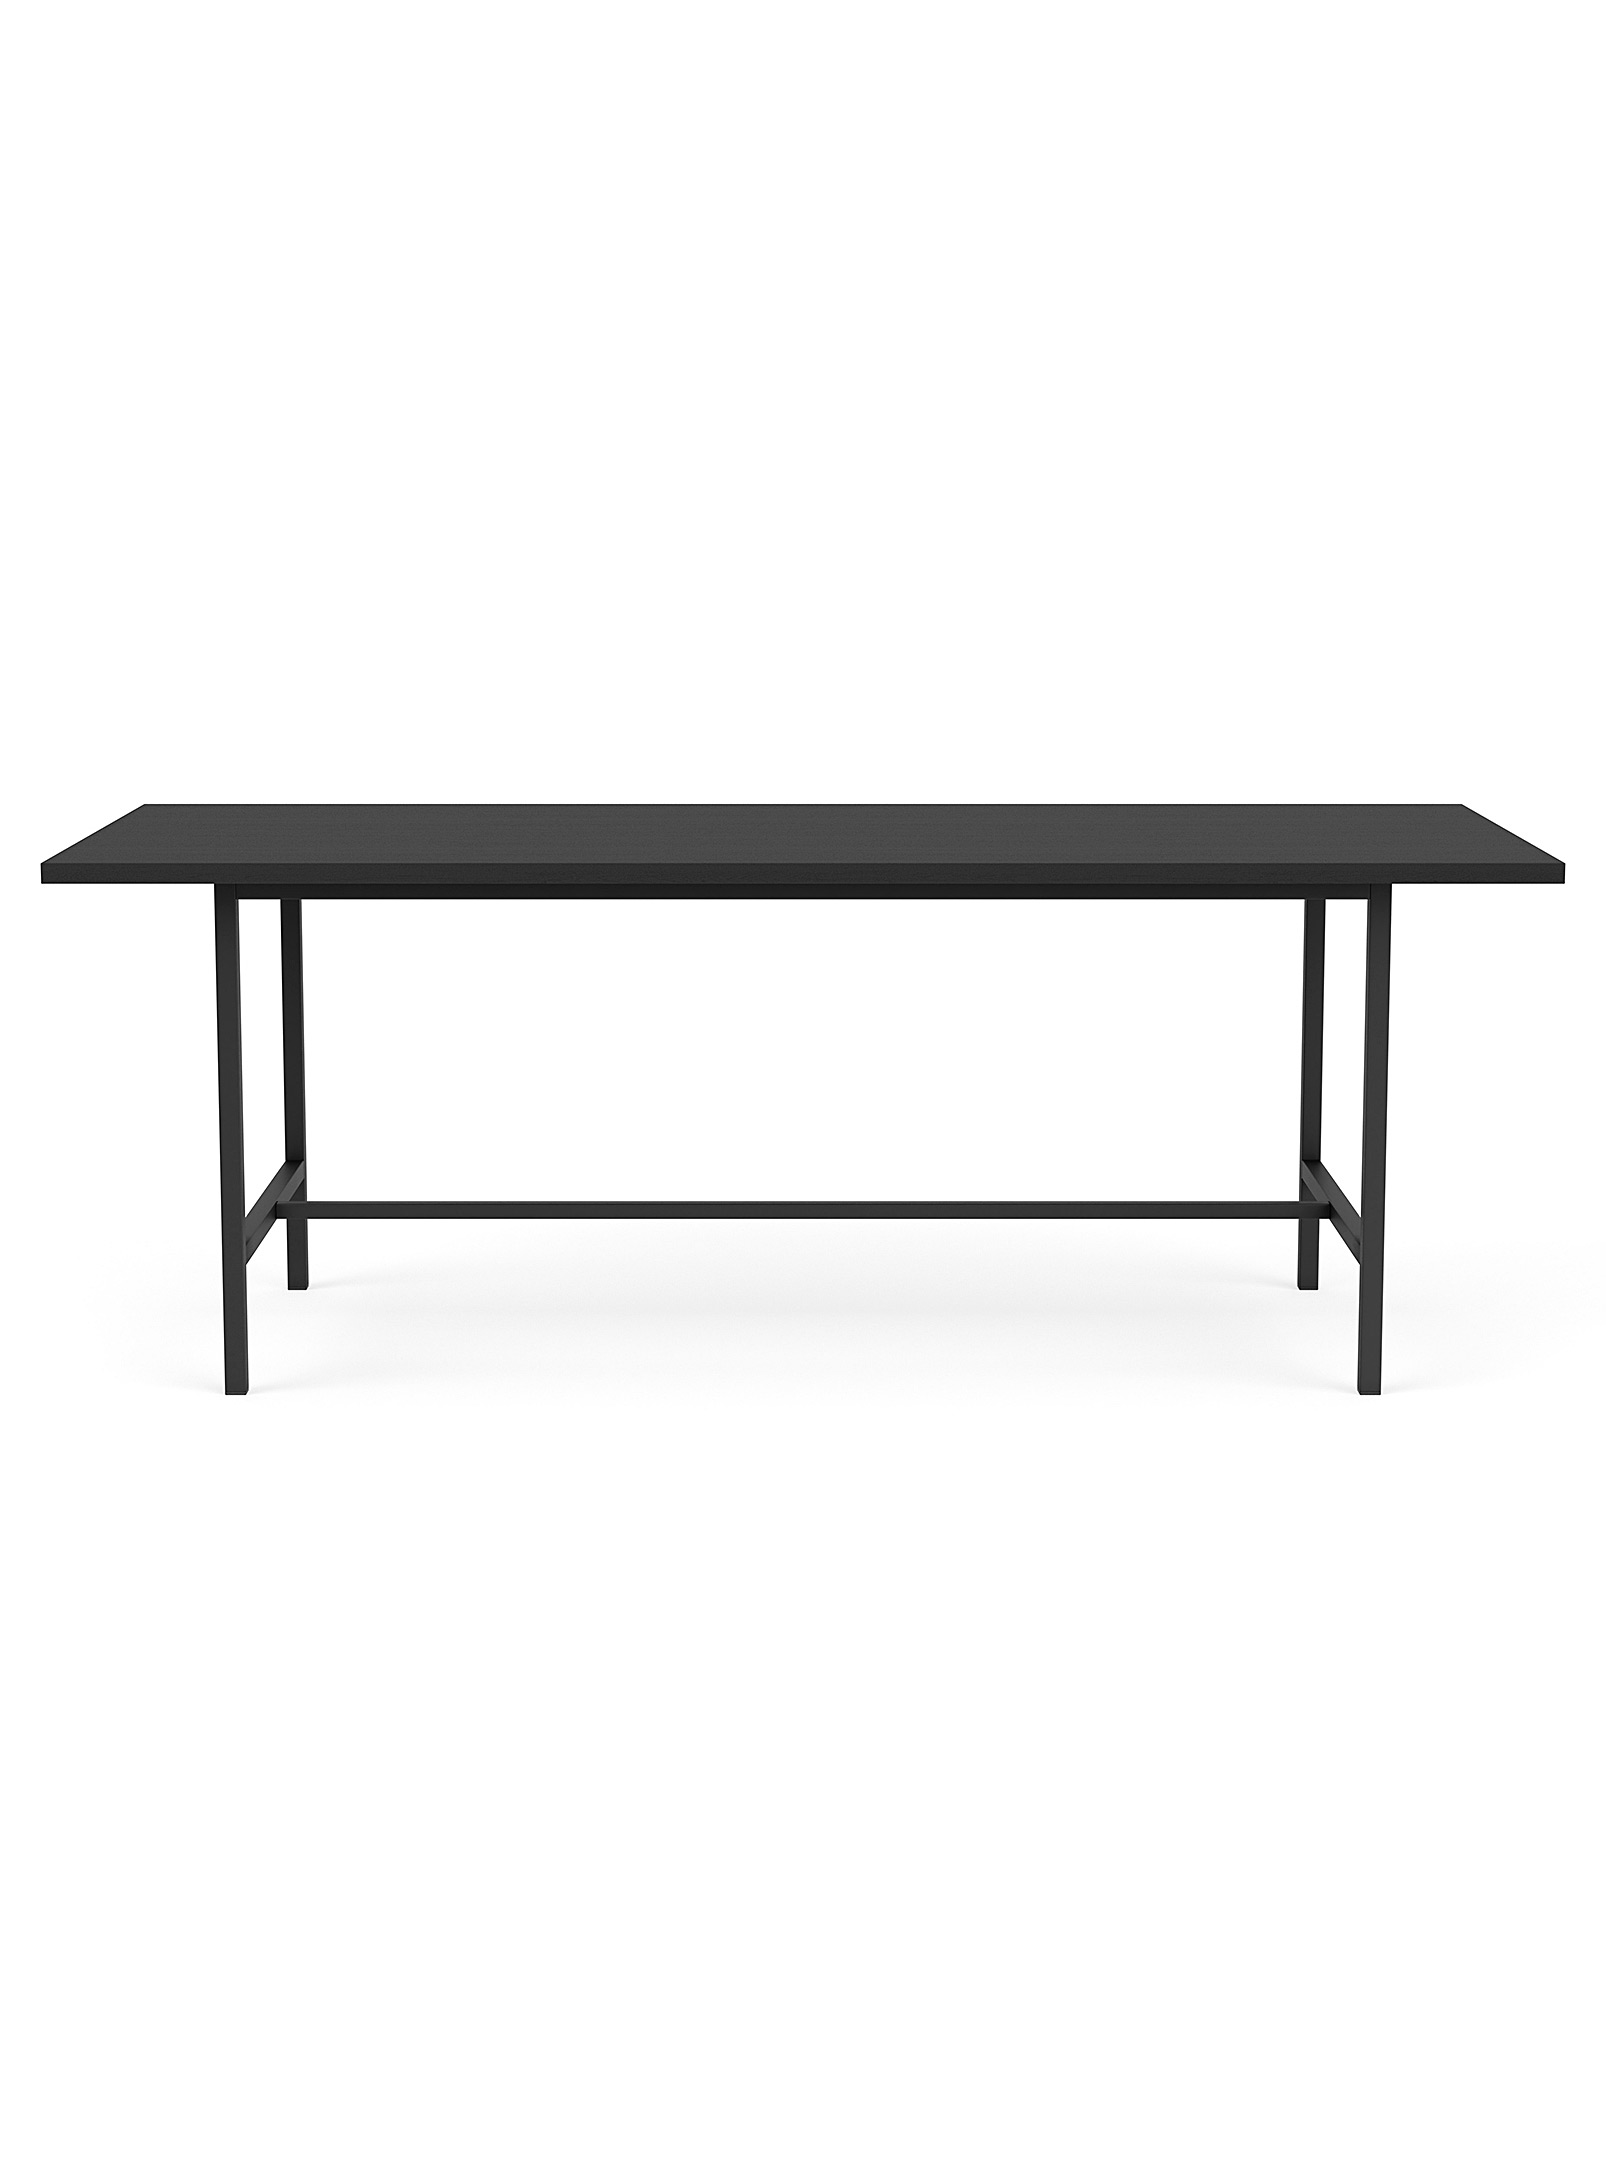 Eq3 Large Black Oak Dining Table Seats 6 To 8 People